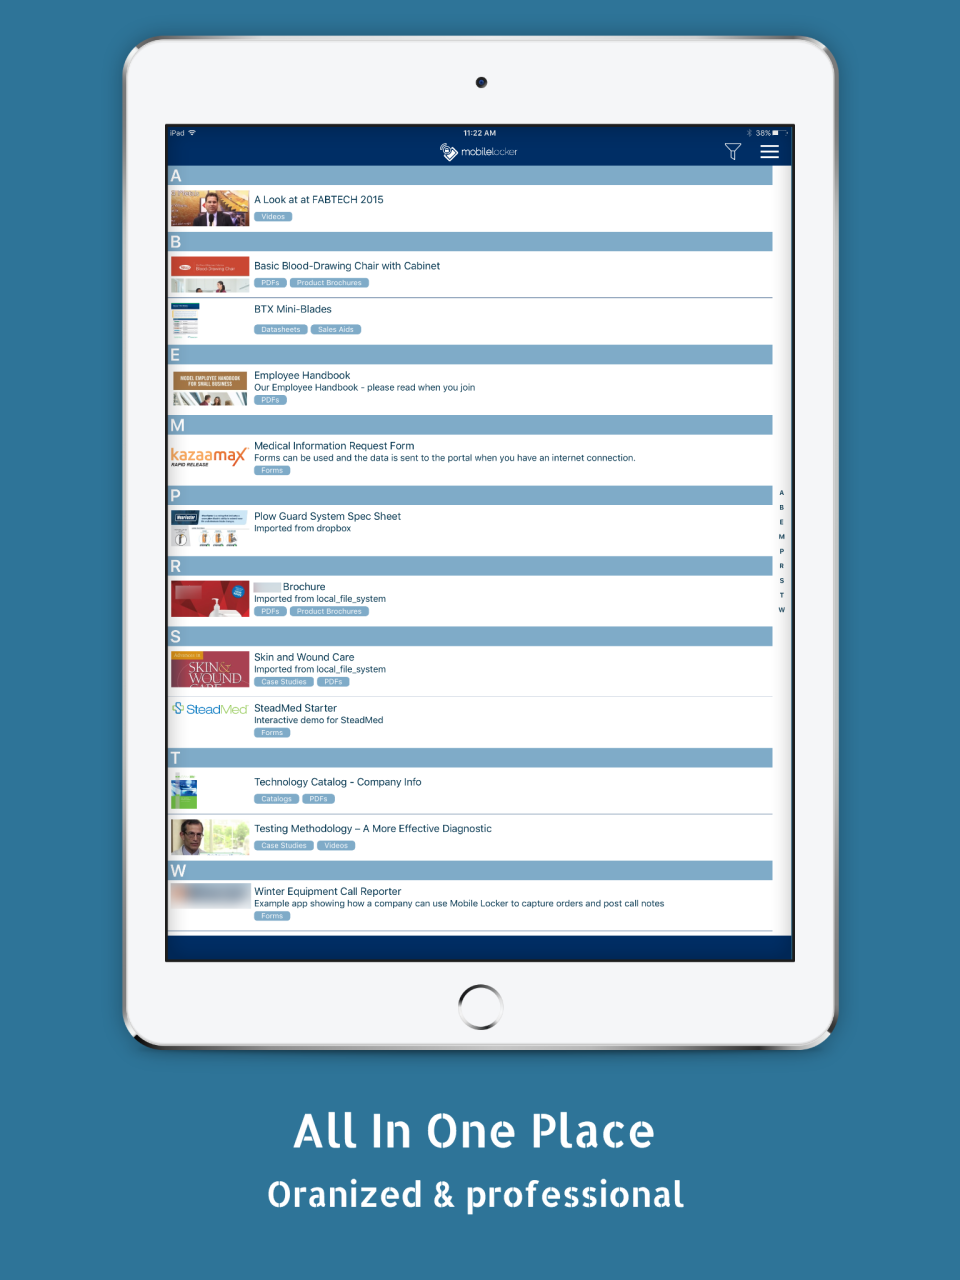 Mobile Locker Software - Content filters that enable users to receive weekly newsletters based on their preferences